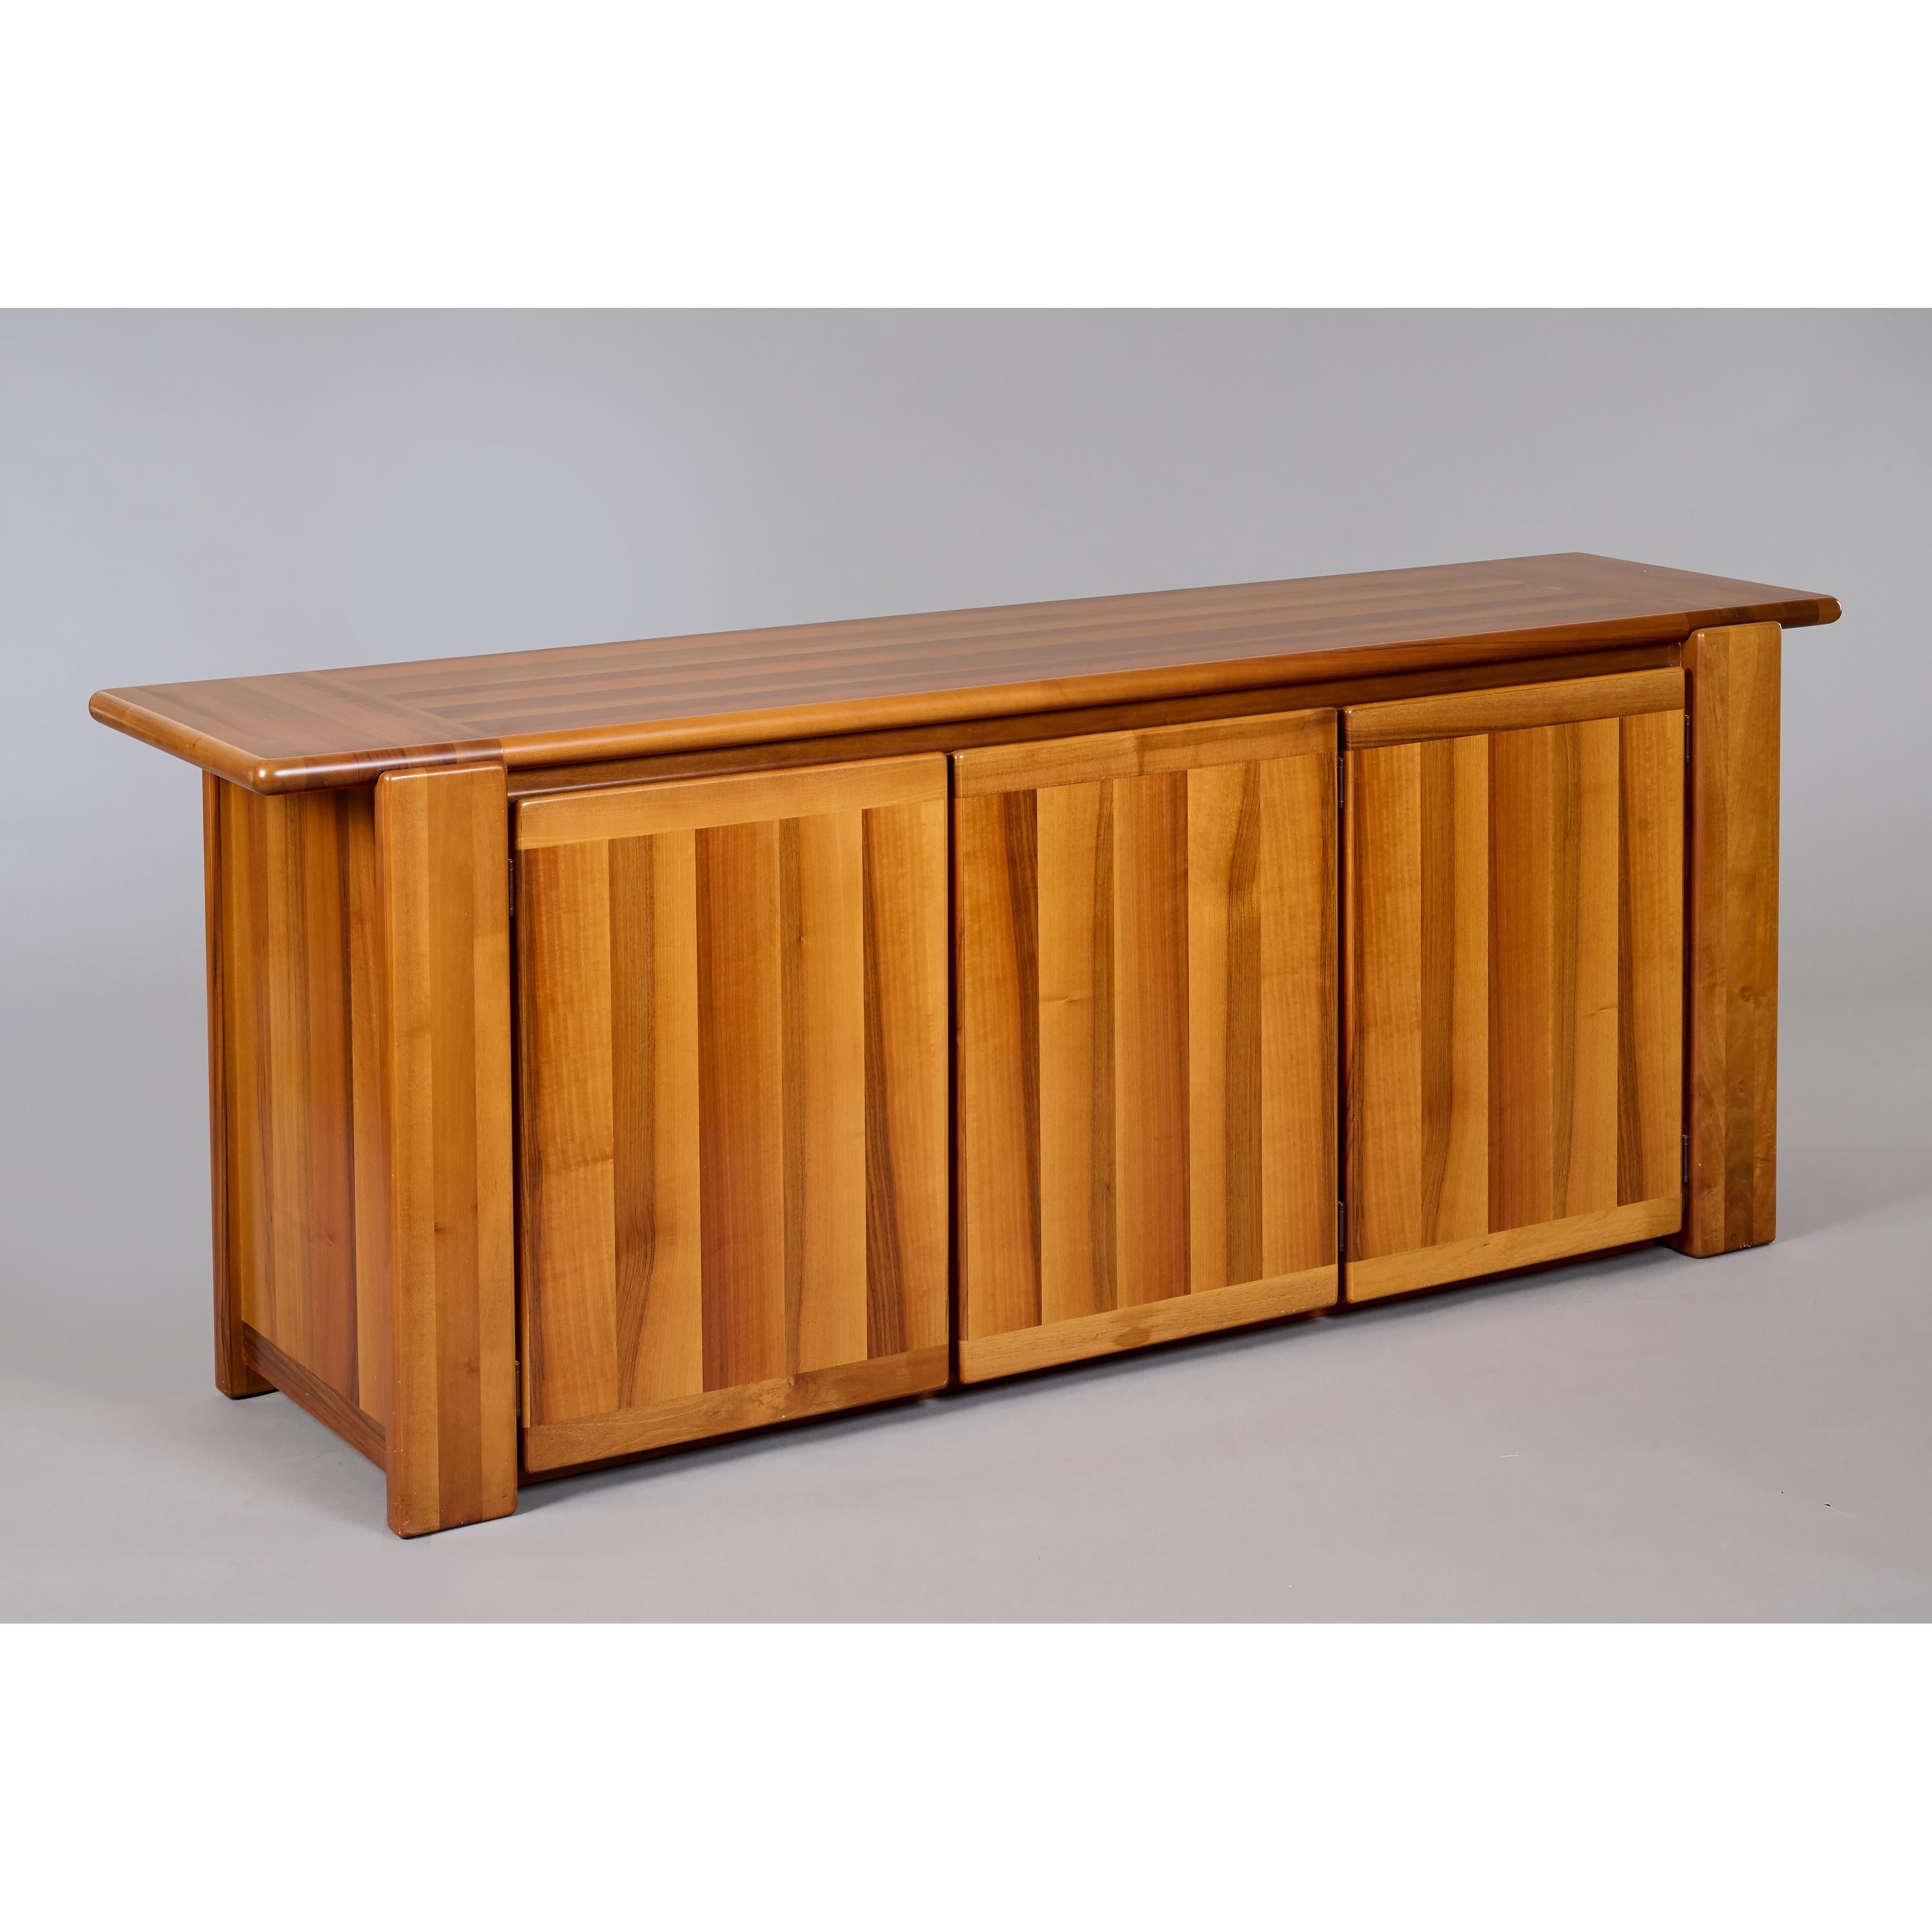 Italy, 1970's

A beautifully crafted Italian sideboard in polished walnut in the manner of woodworker Pierre Chapo, with an elongated overhang and three doors concealing capacious storage and shelving. The strikingly veneered top is striated both